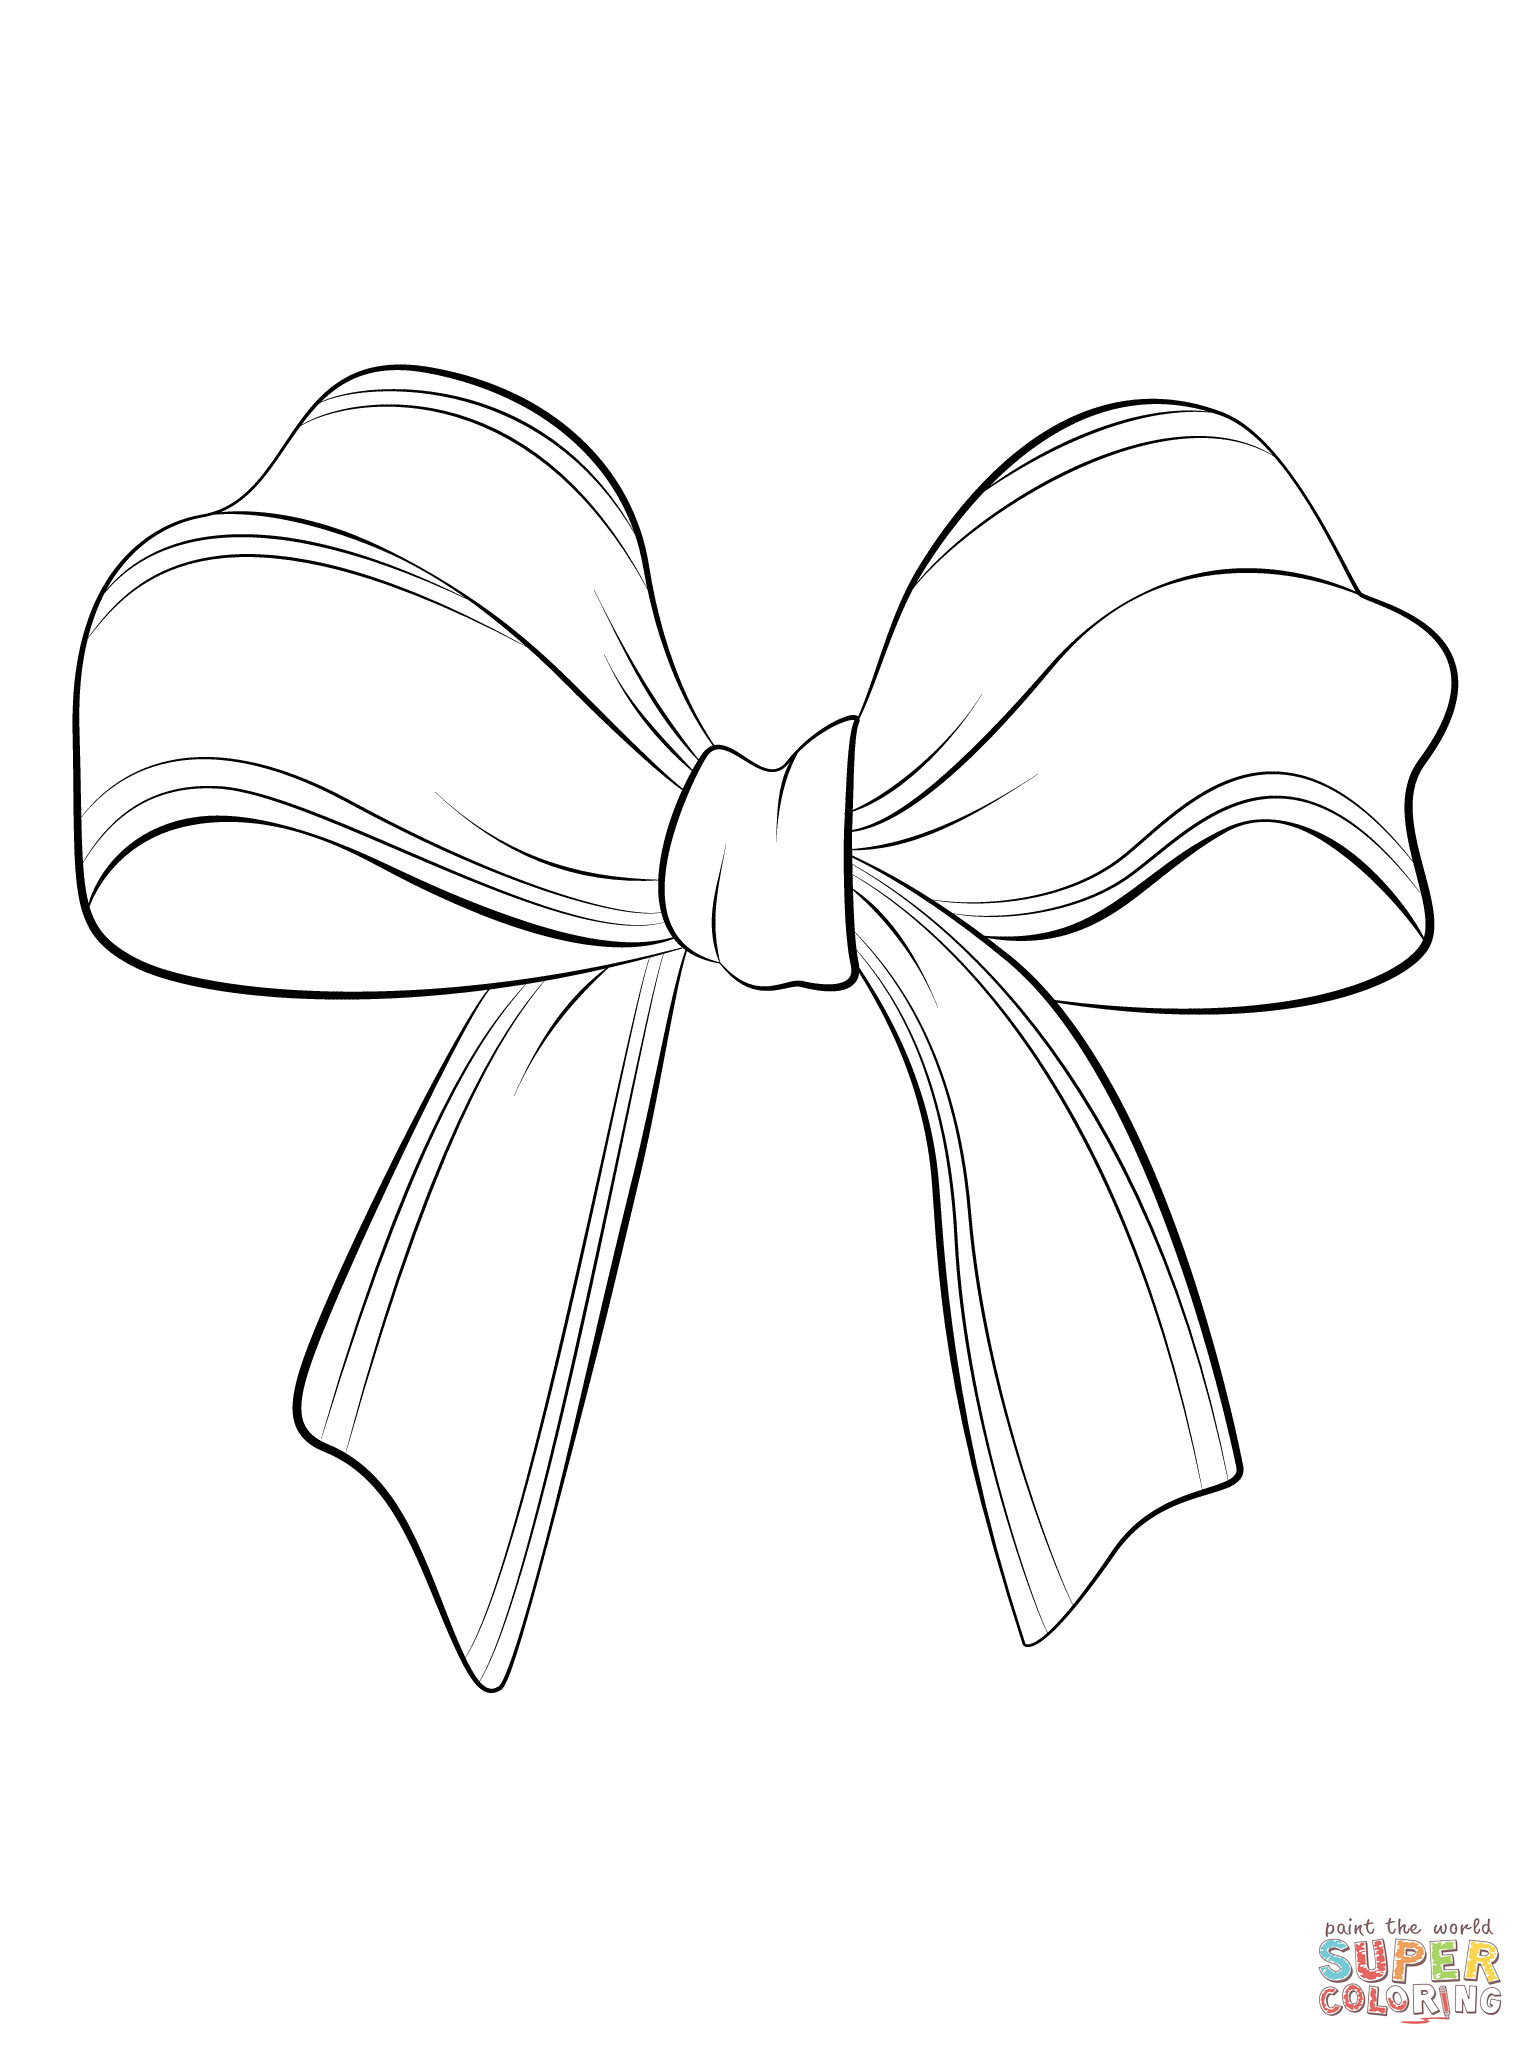 Bow Coloring Pages Christmas Bow Coloring Page Free Printable Coloring Pages